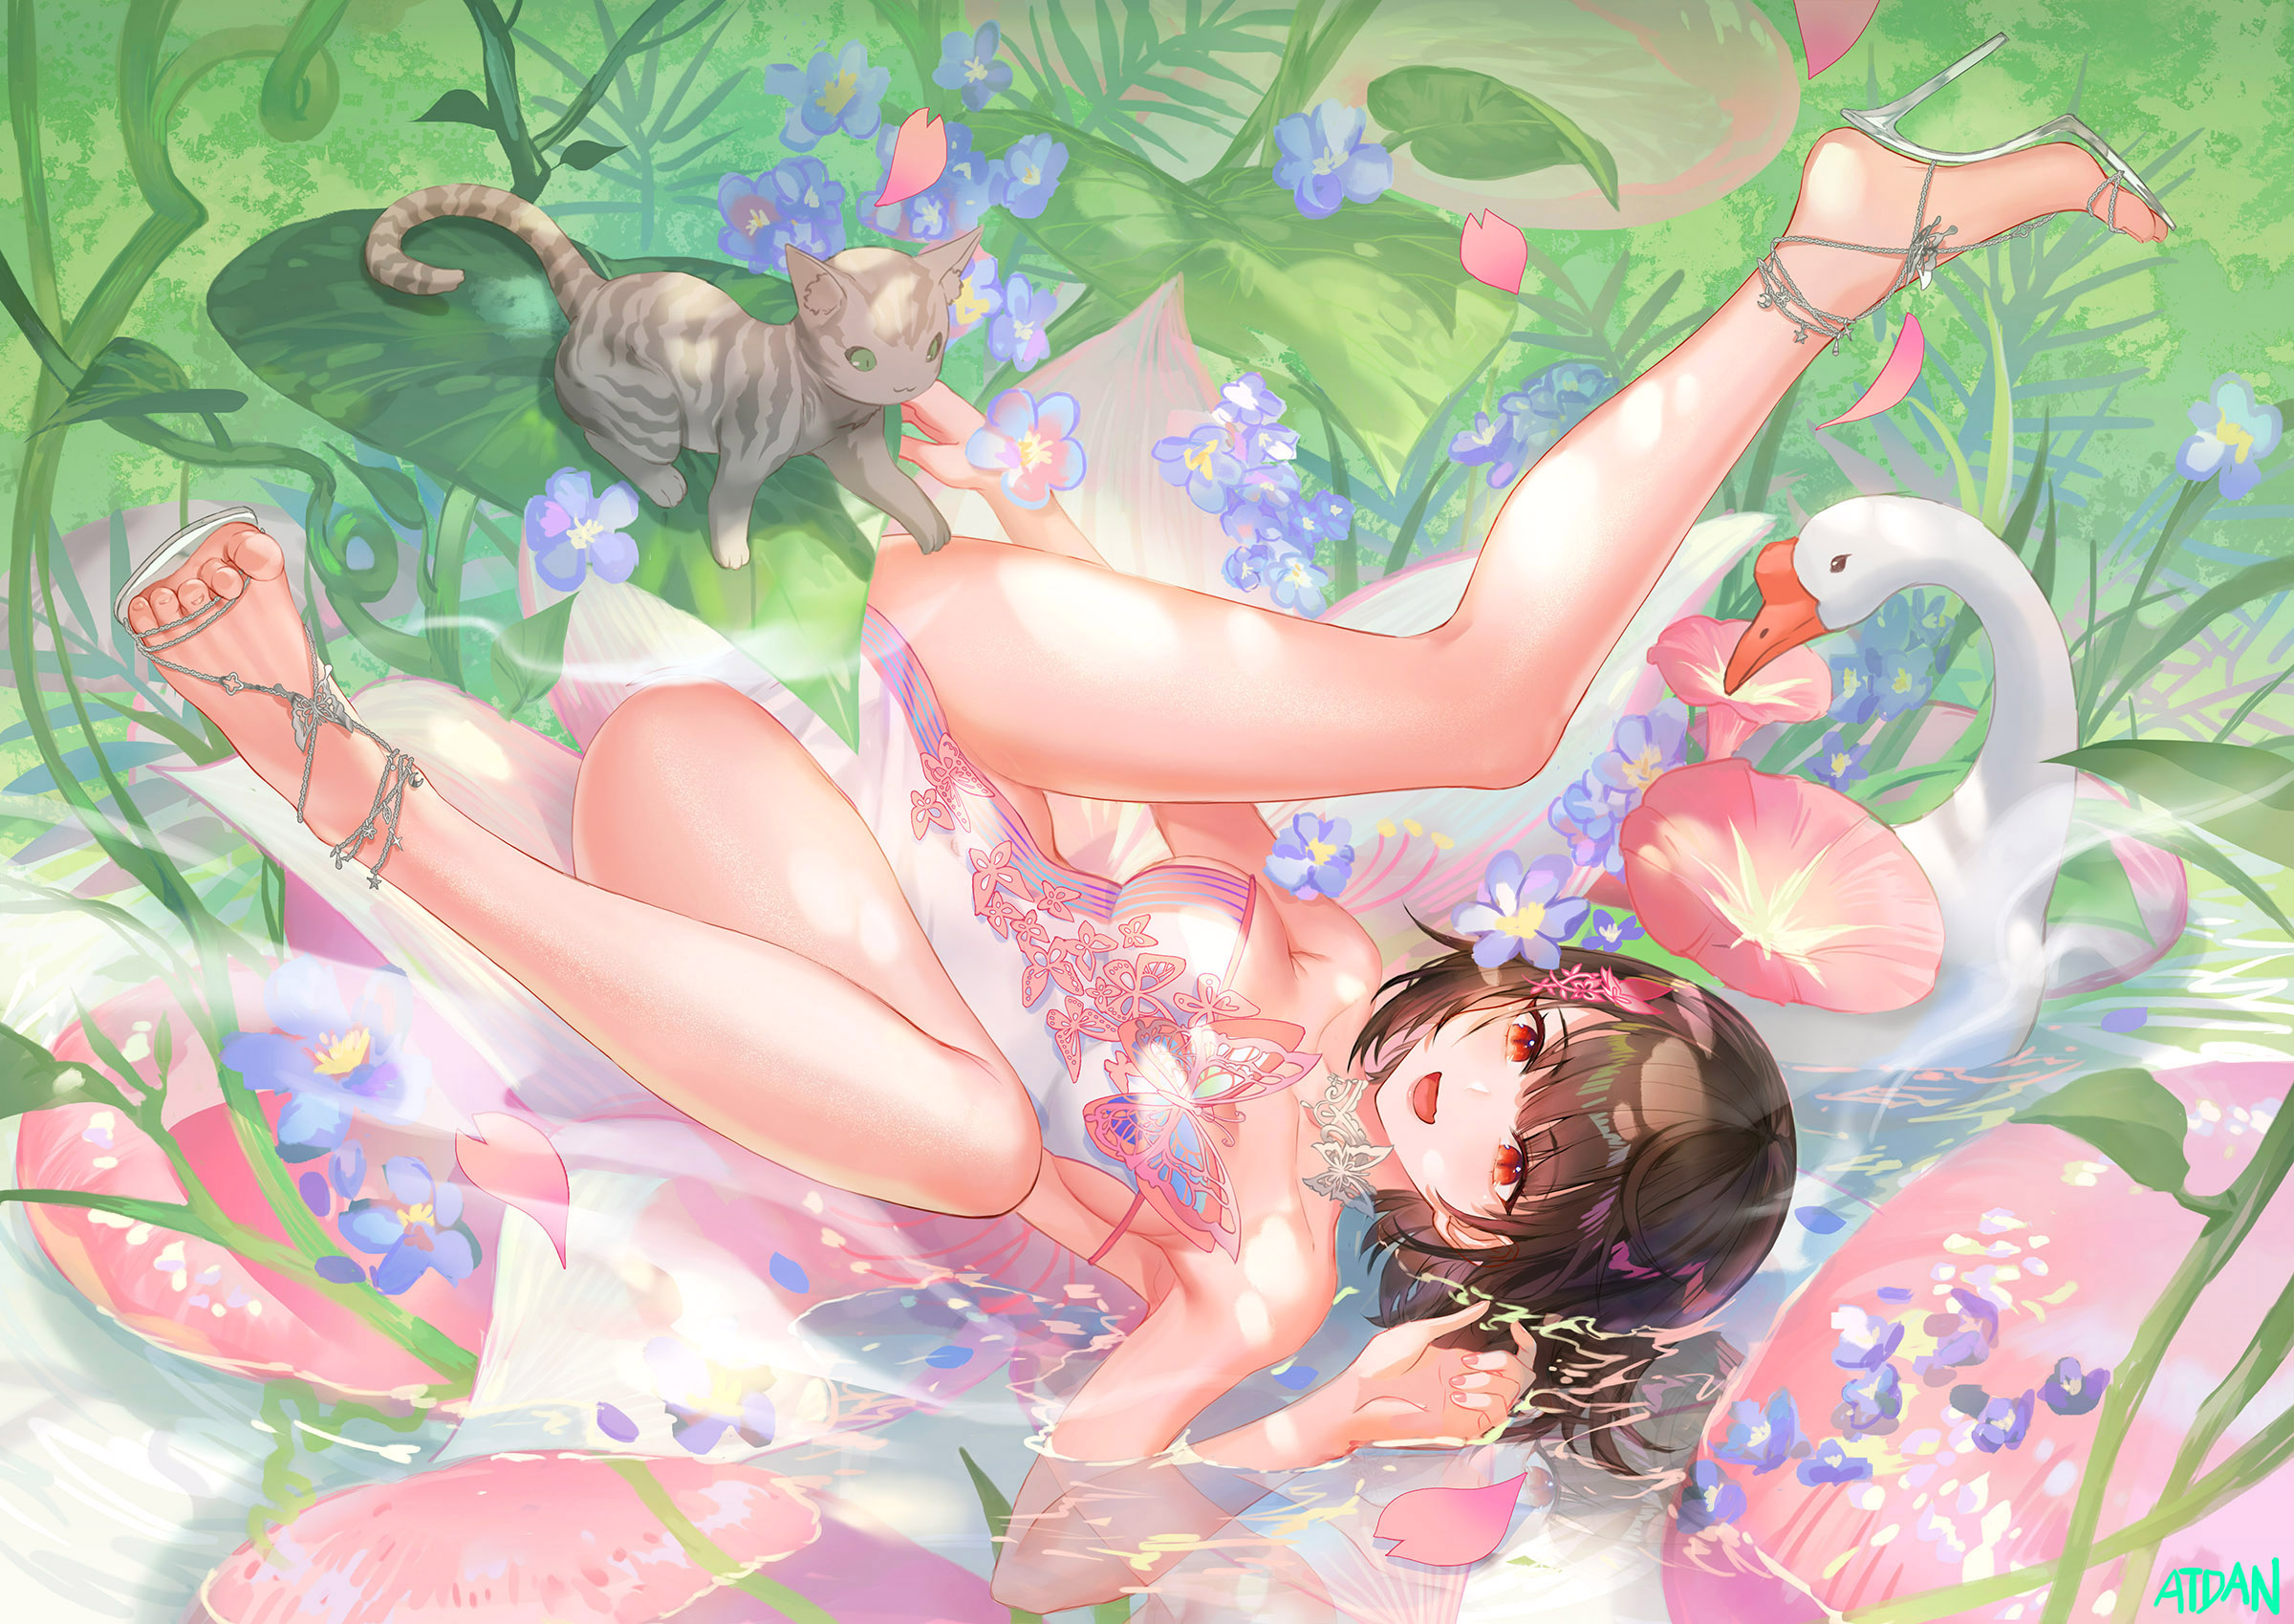 Anime 2400x1699 Atdan original characters anime girls cats geese animals water spread legs red eyes petals plants white heels